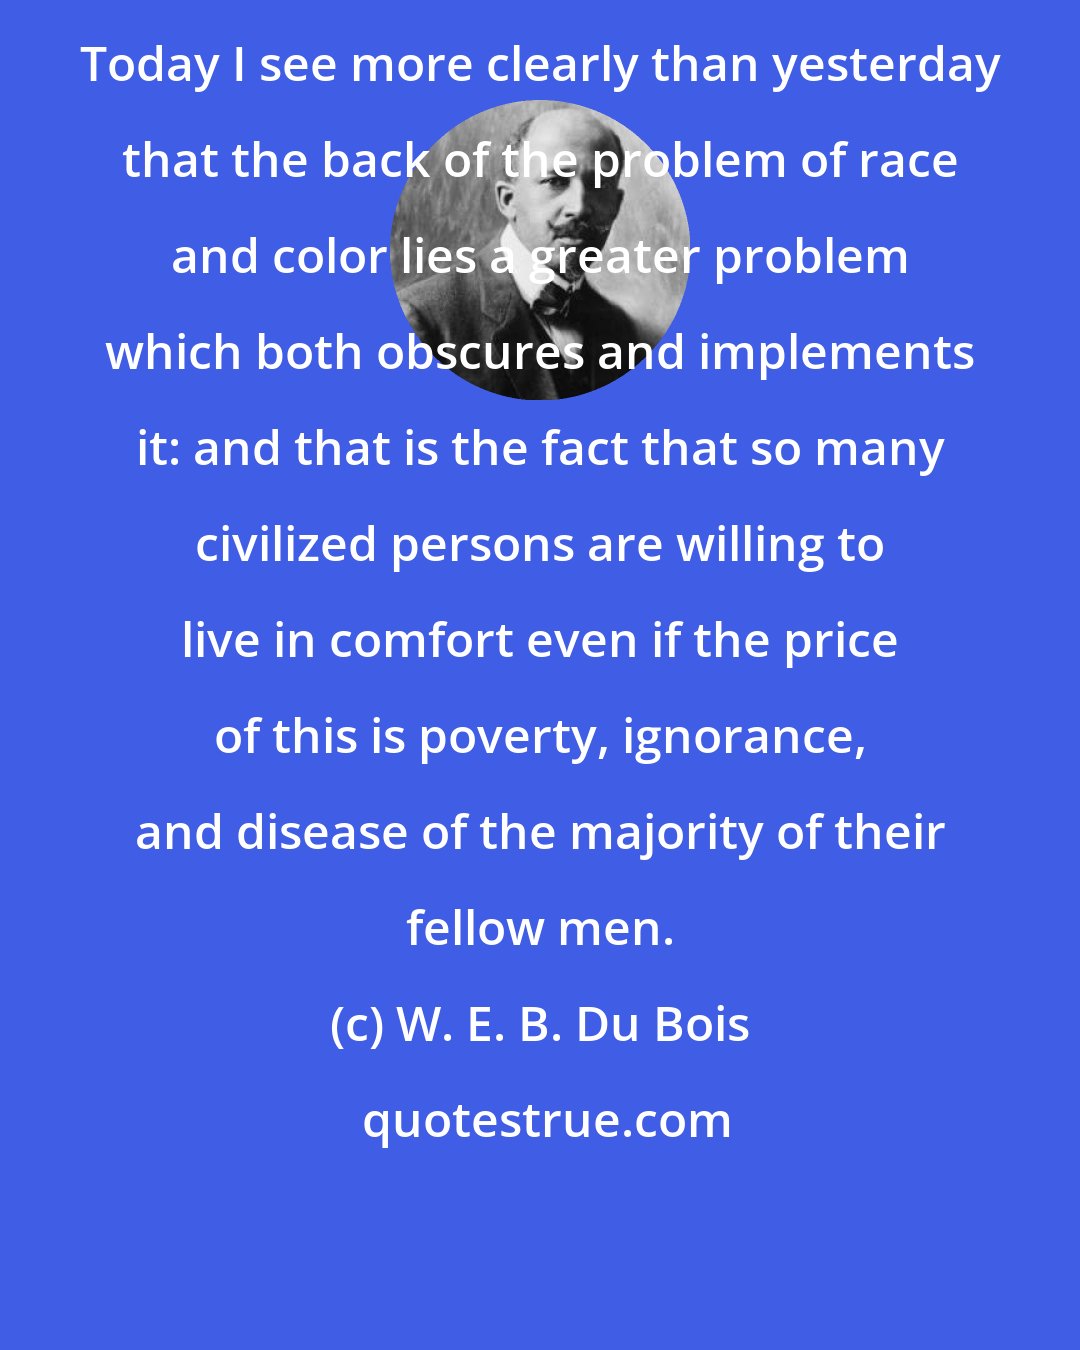 W. E. B. Du Bois: Today I see more clearly than yesterday that the back of the problem of race and color lies a greater problem which both obscures and implements it: and that is the fact that so many civilized persons are willing to live in comfort even if the price of this is poverty, ignorance, and disease of the majority of their fellow men.